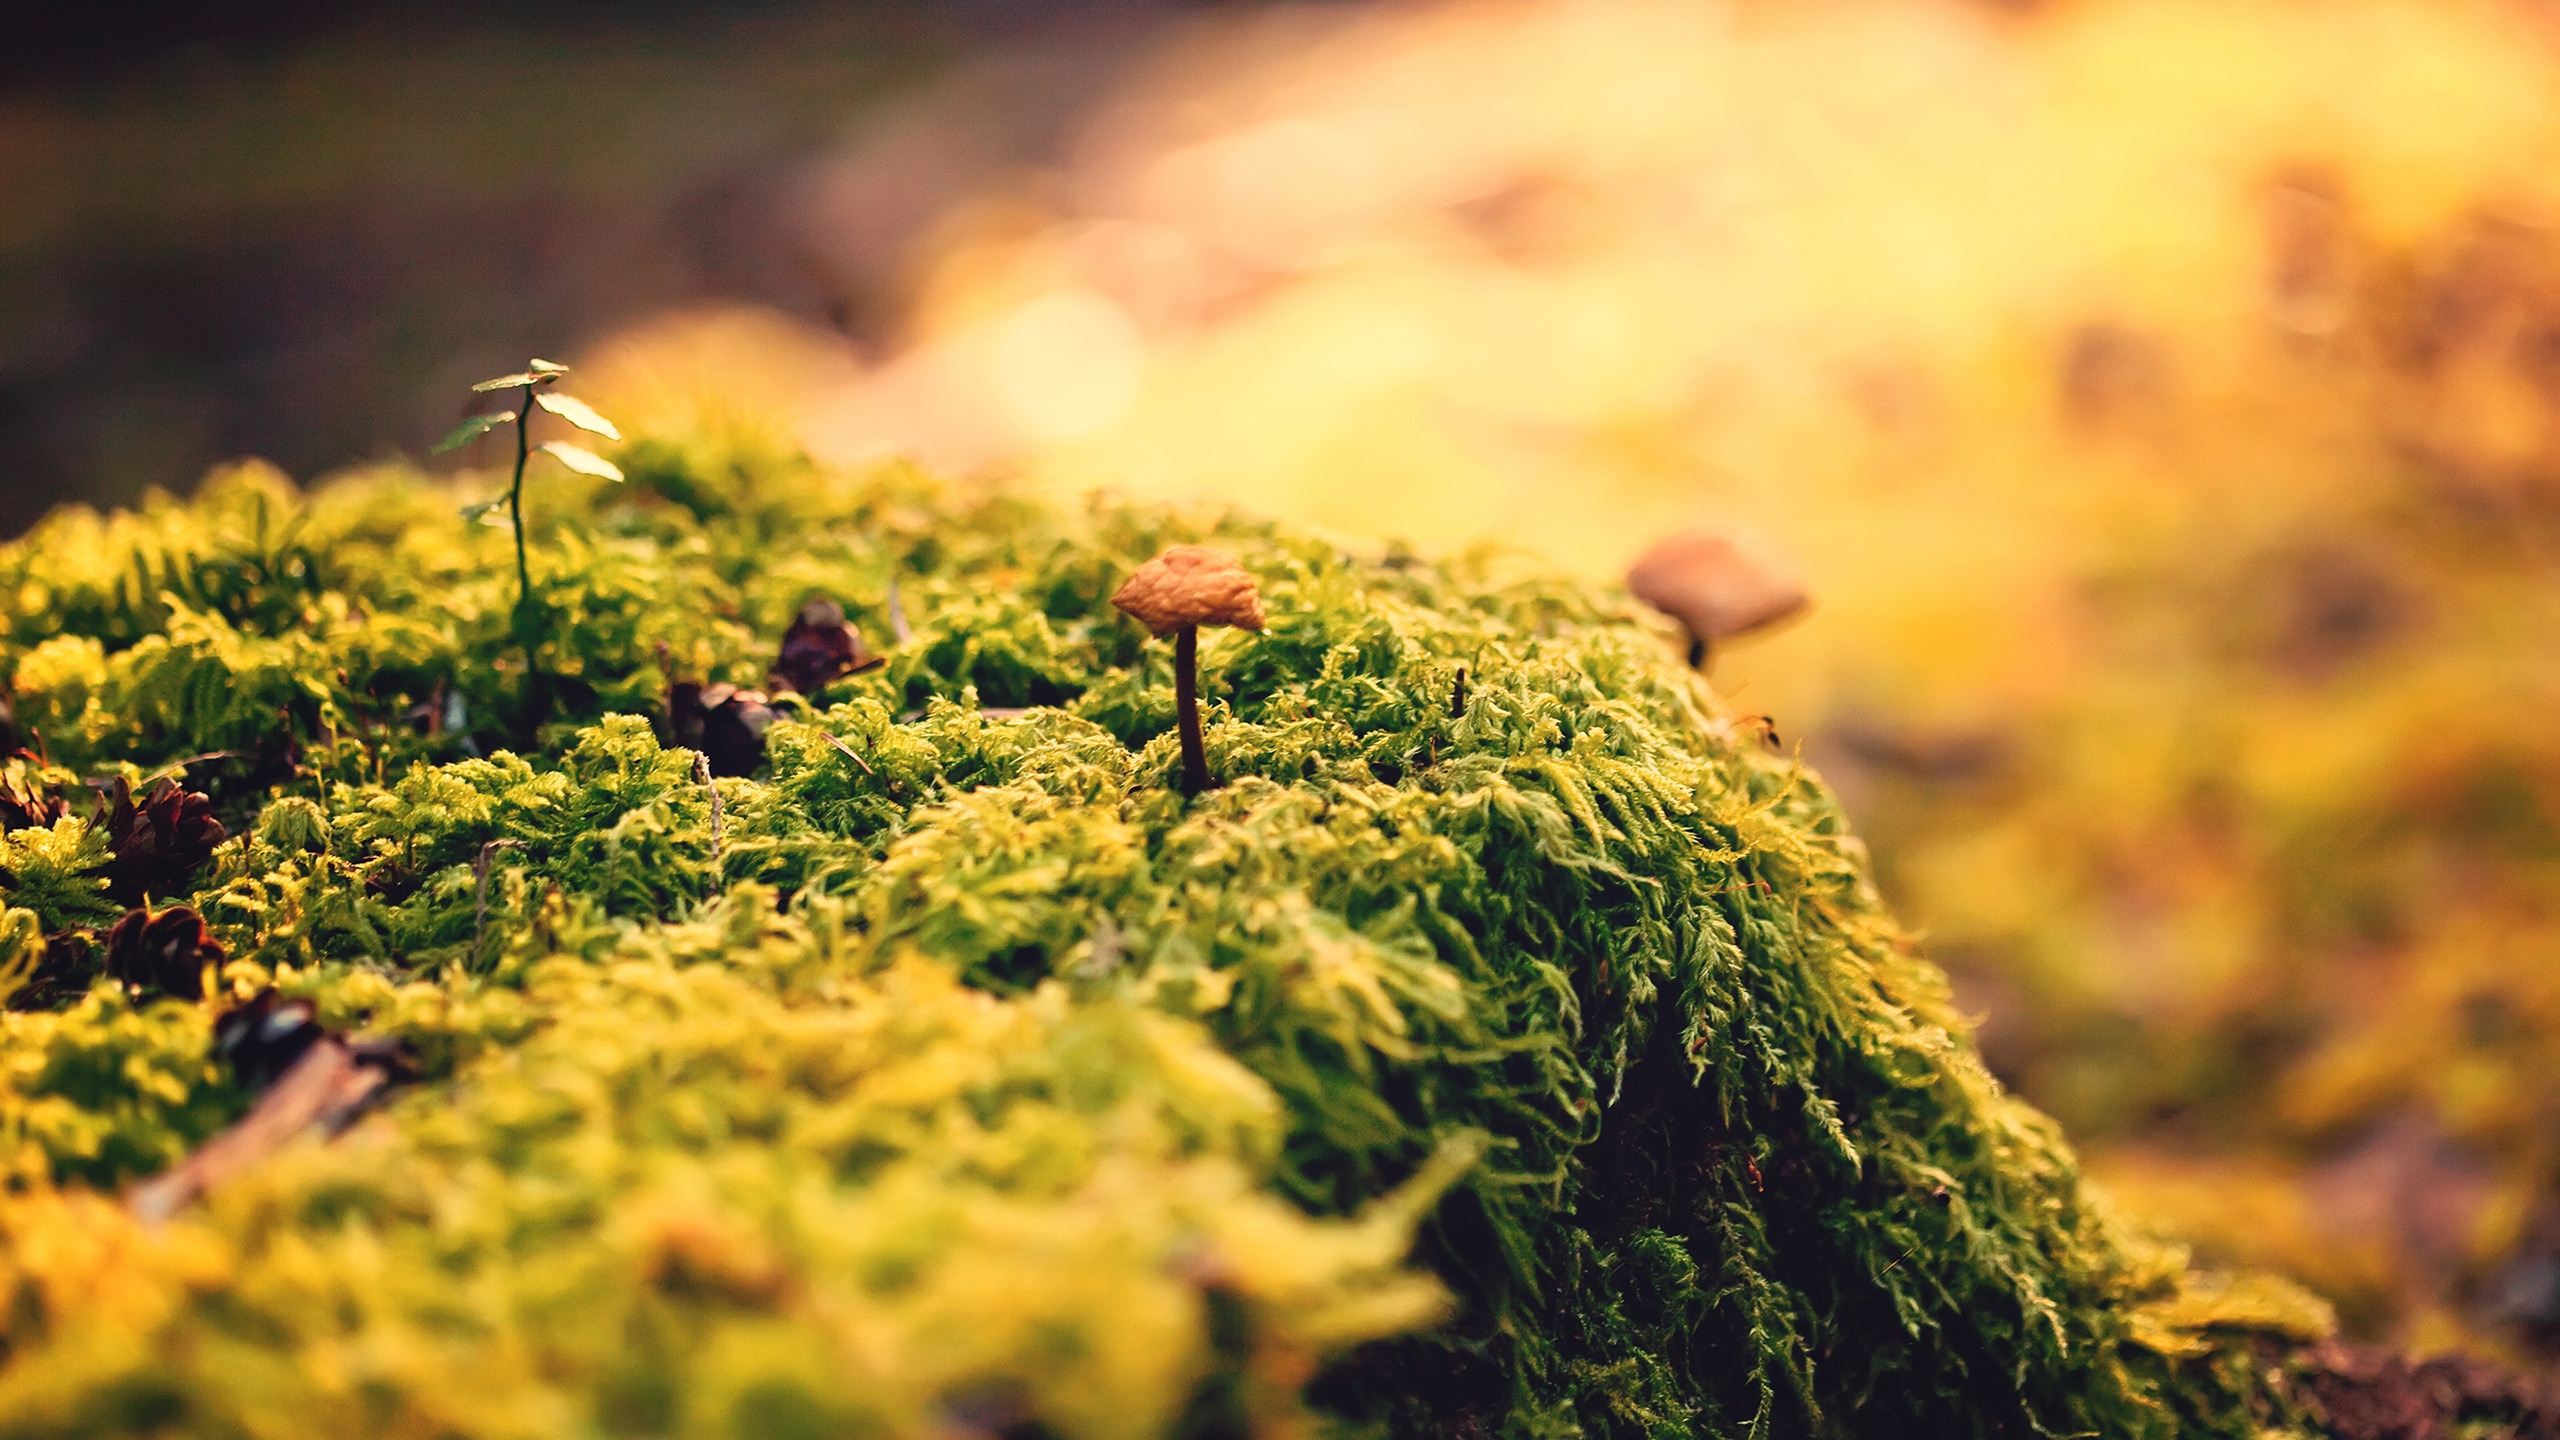 Beautiful Close Up Moss for 2560x1440 HDTV resolution